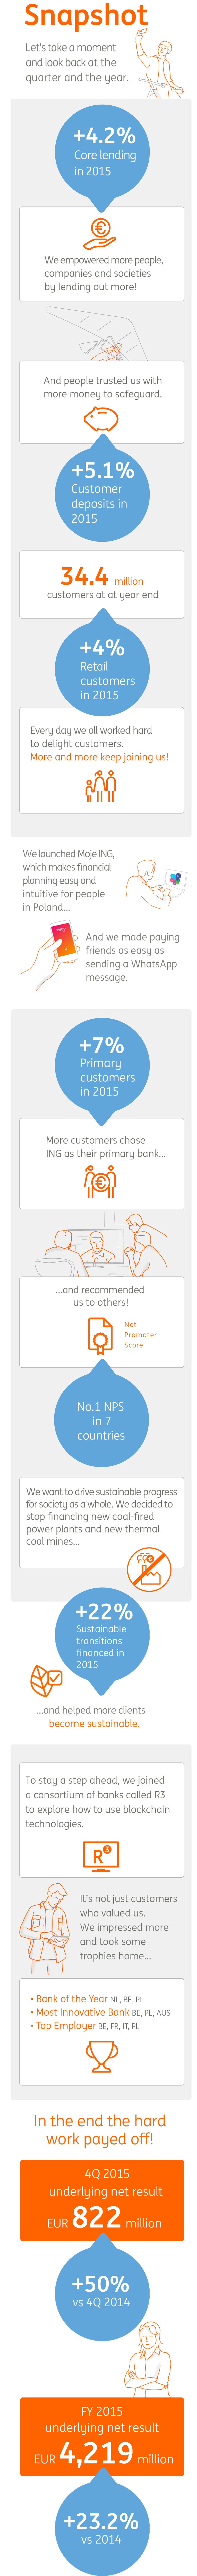 Infographic Highlights ING Bank